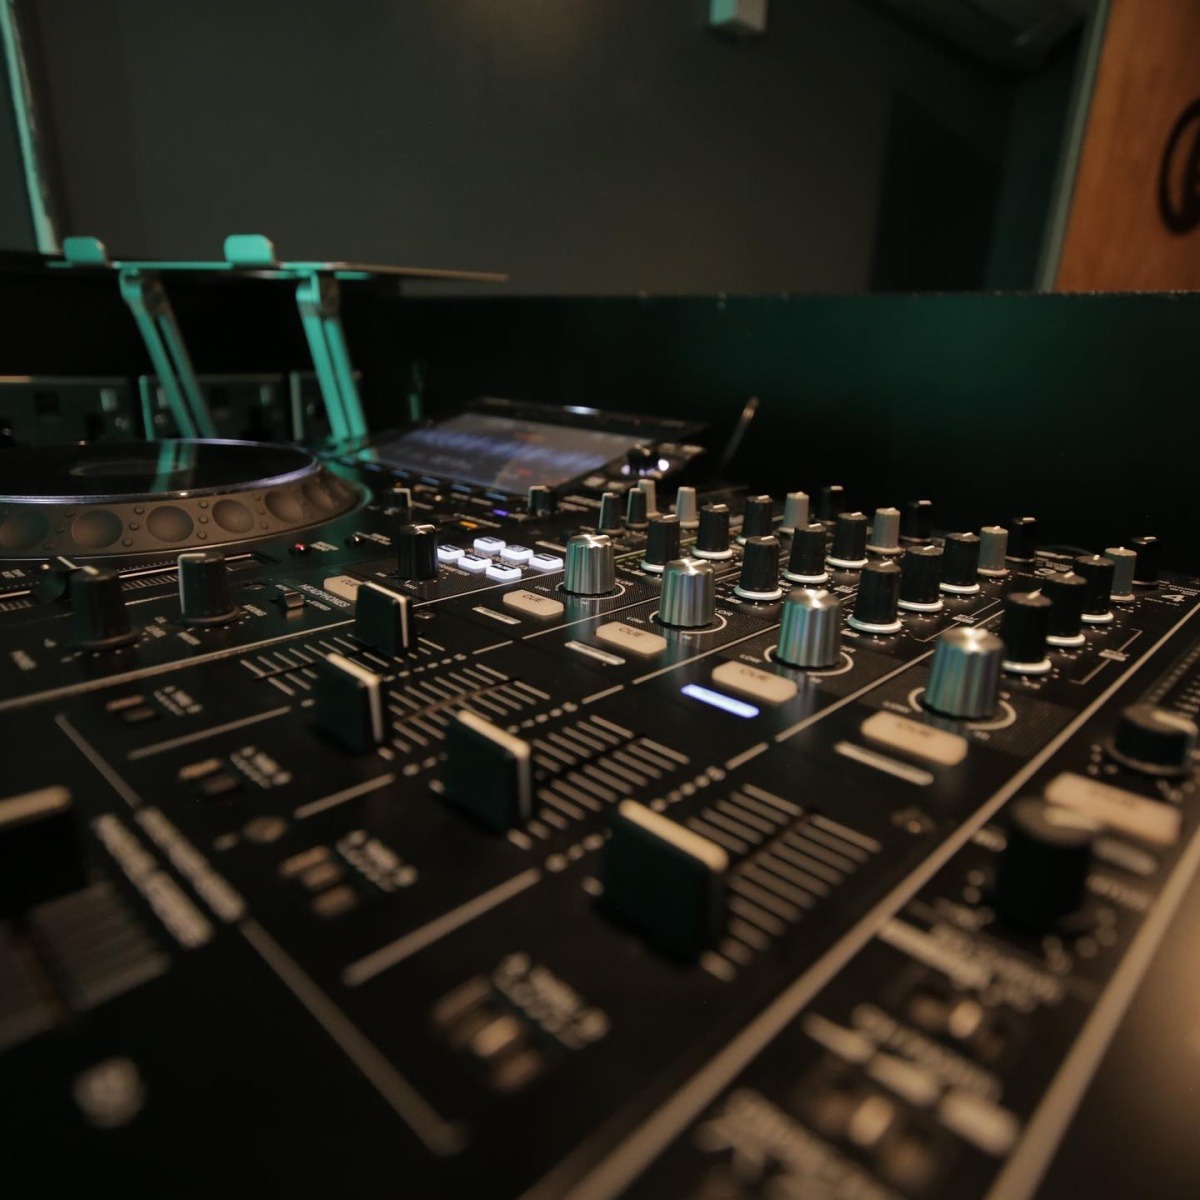 New 24-hour DJ rehearsal space and studio, All Nighter Studios, launches in East London